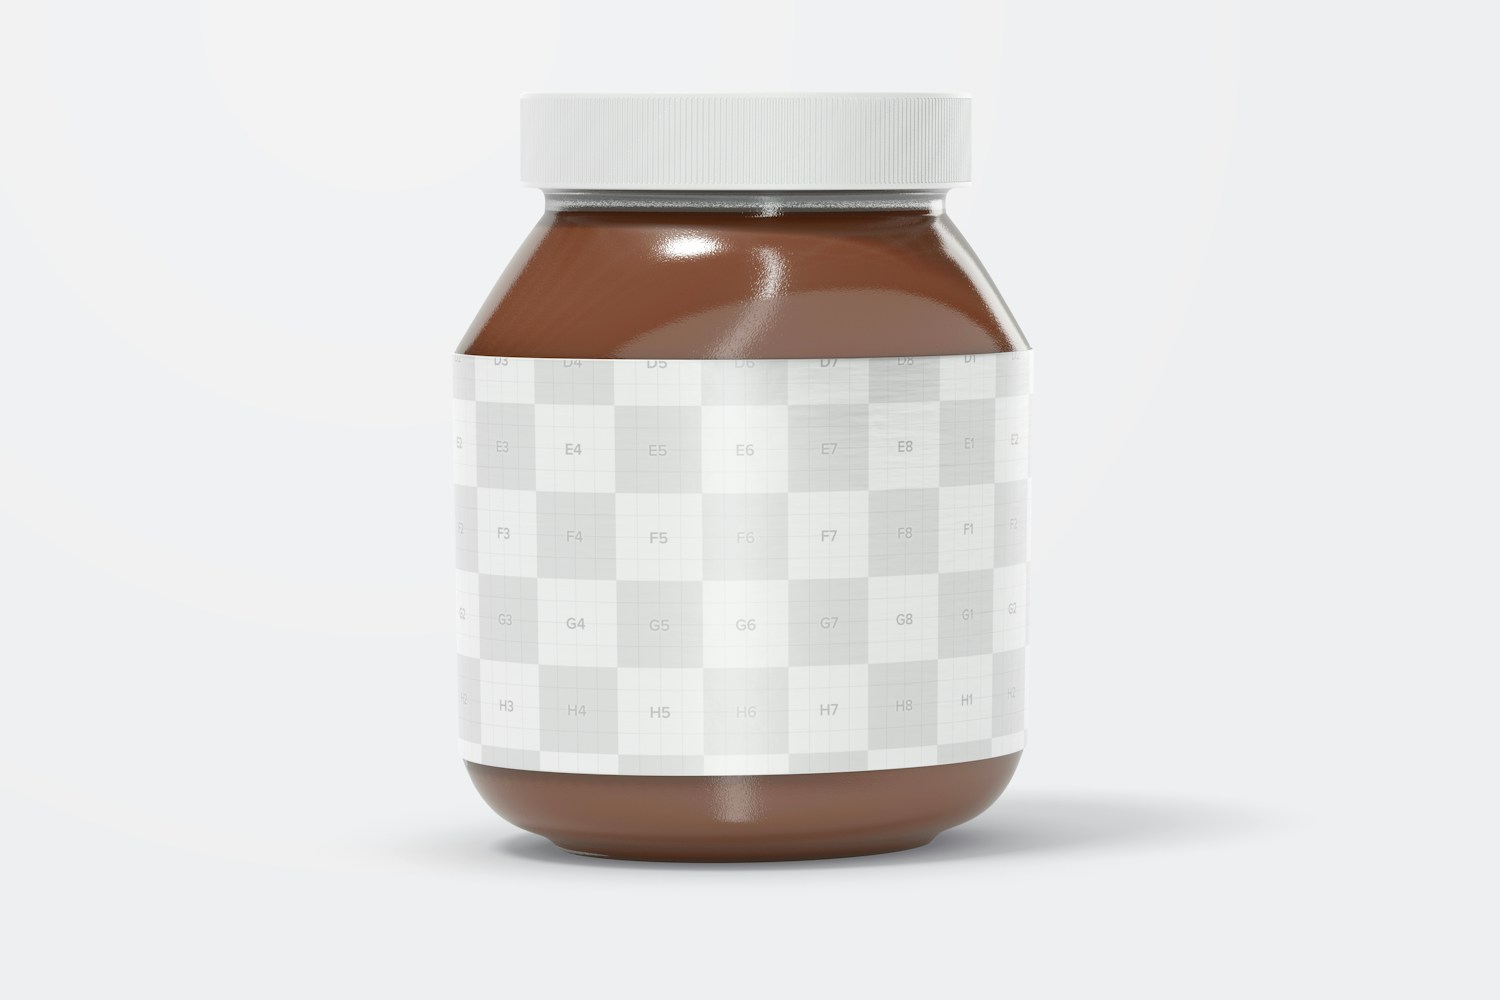 You can personalize the jar thanks to its editable areas.